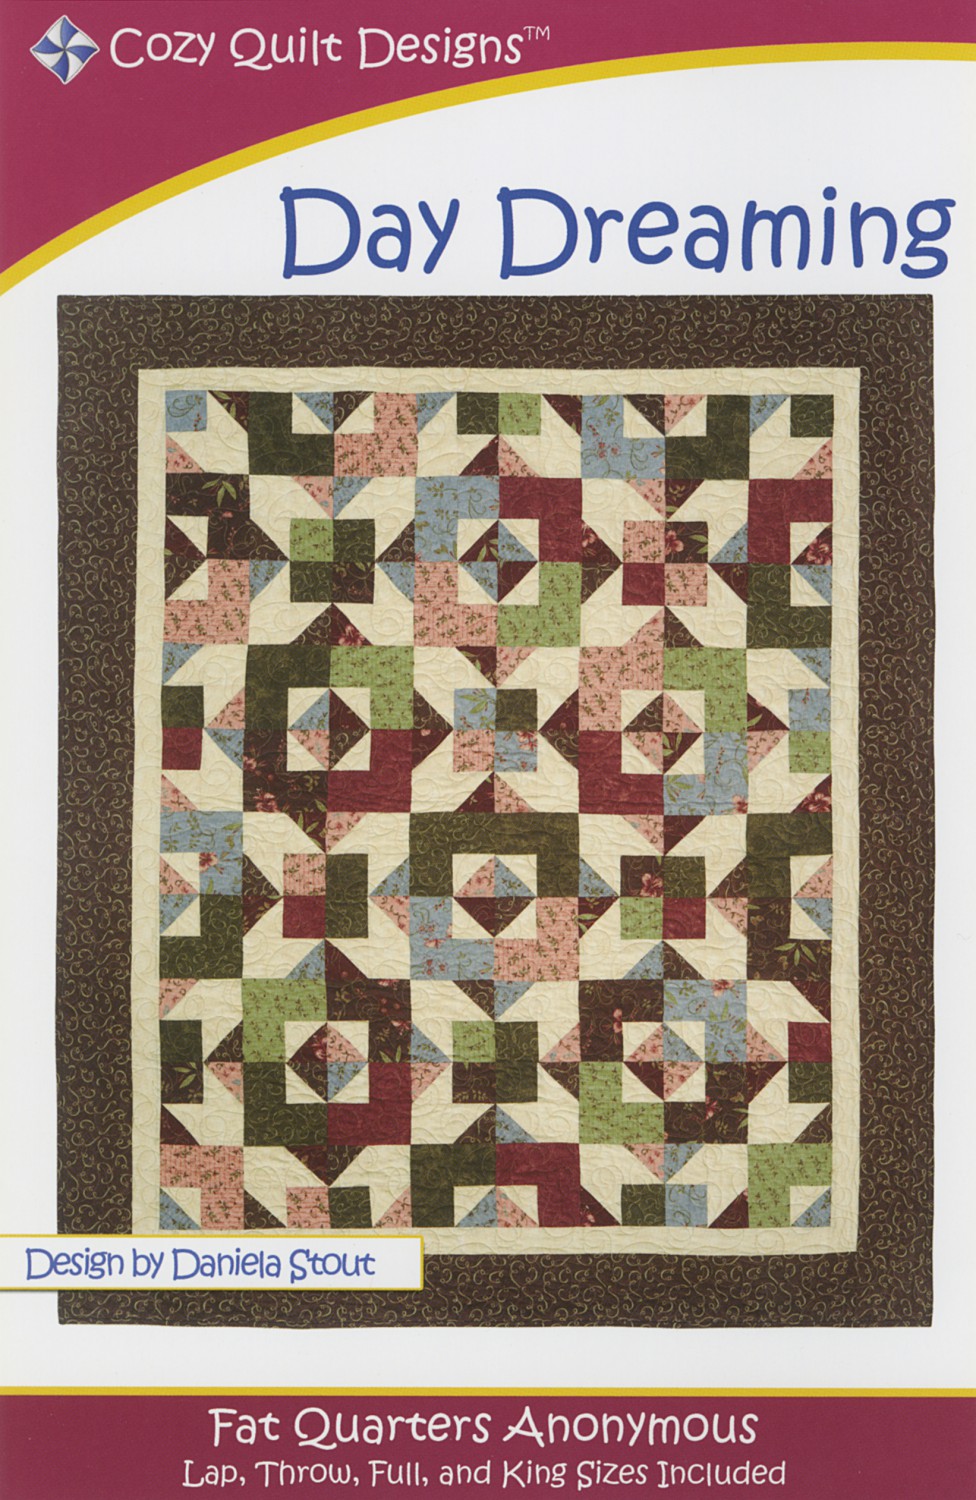 Cozy Quilt Designs Day Dreaming Quilt Pattern